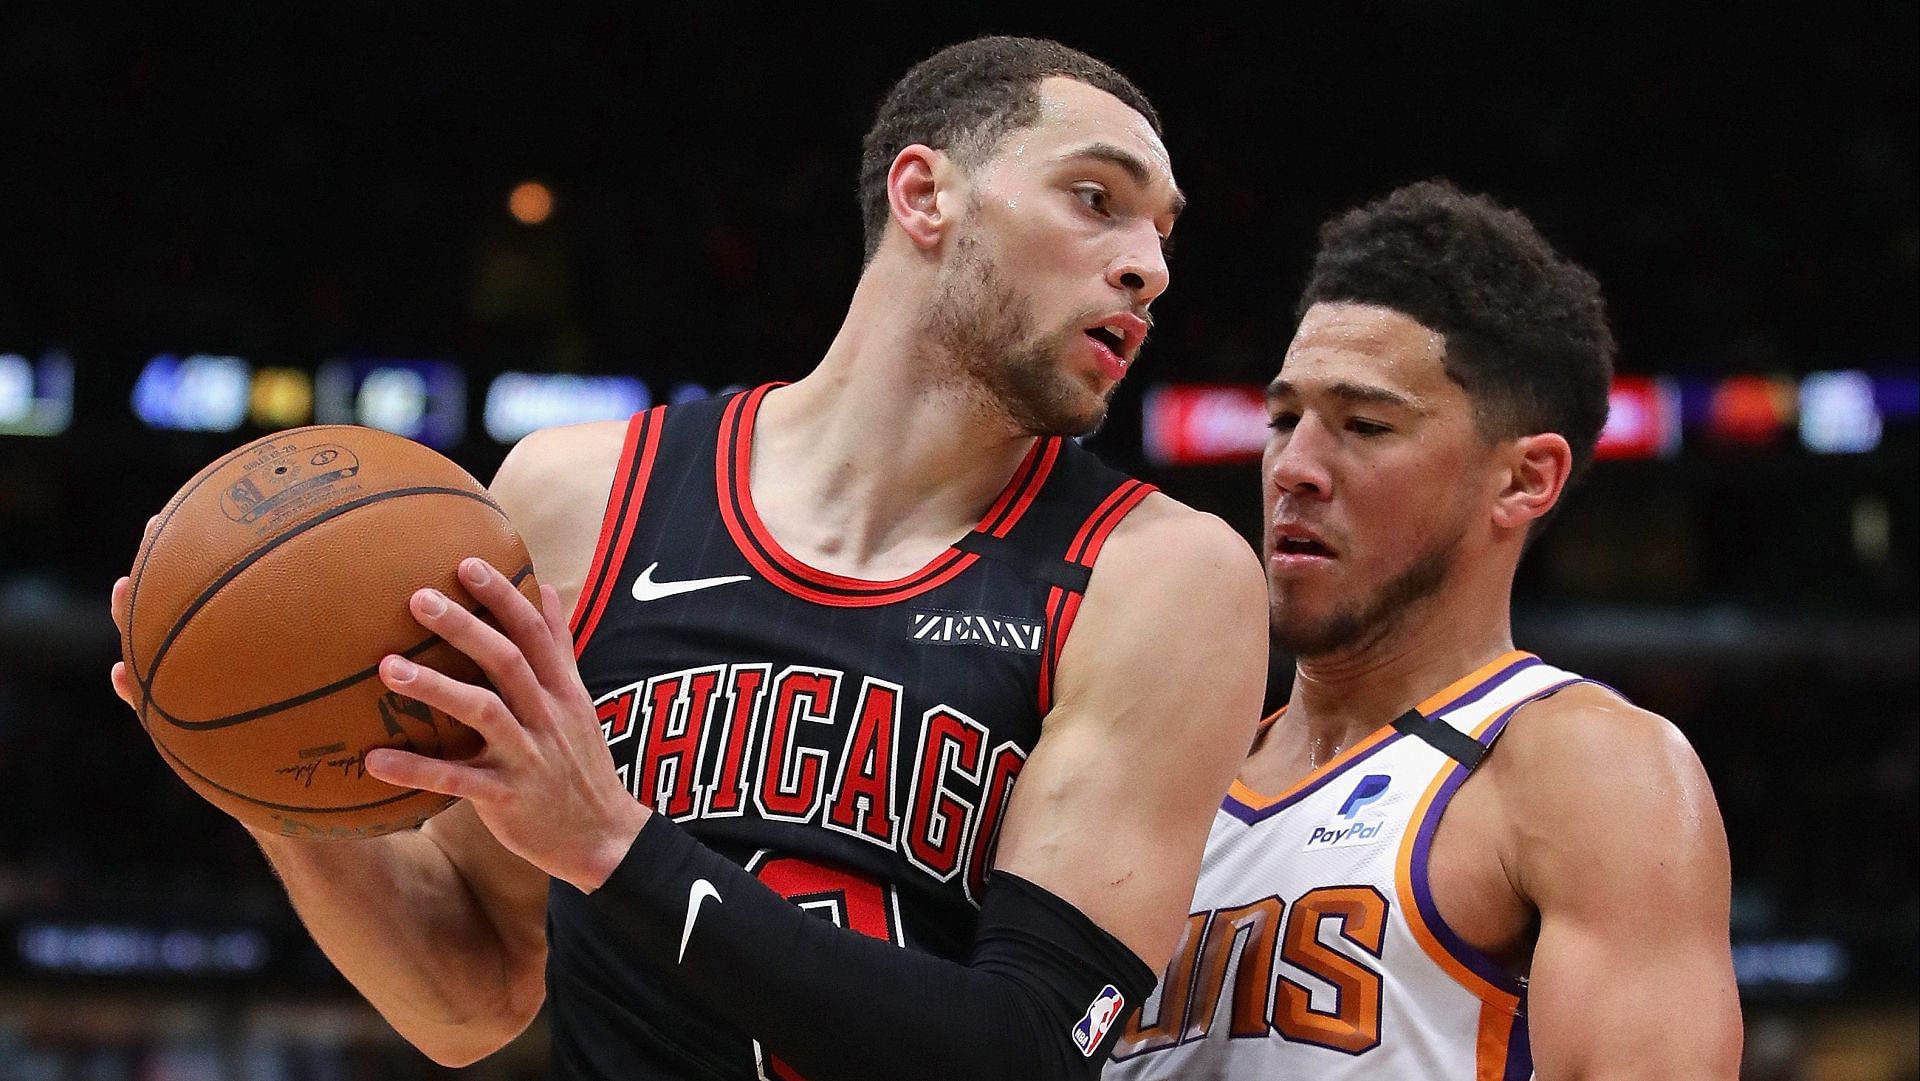 The visiting Chicago Bulls are hoping to even their season series against the Phoenix Suns on Friday. [Photo: Heavy.com]